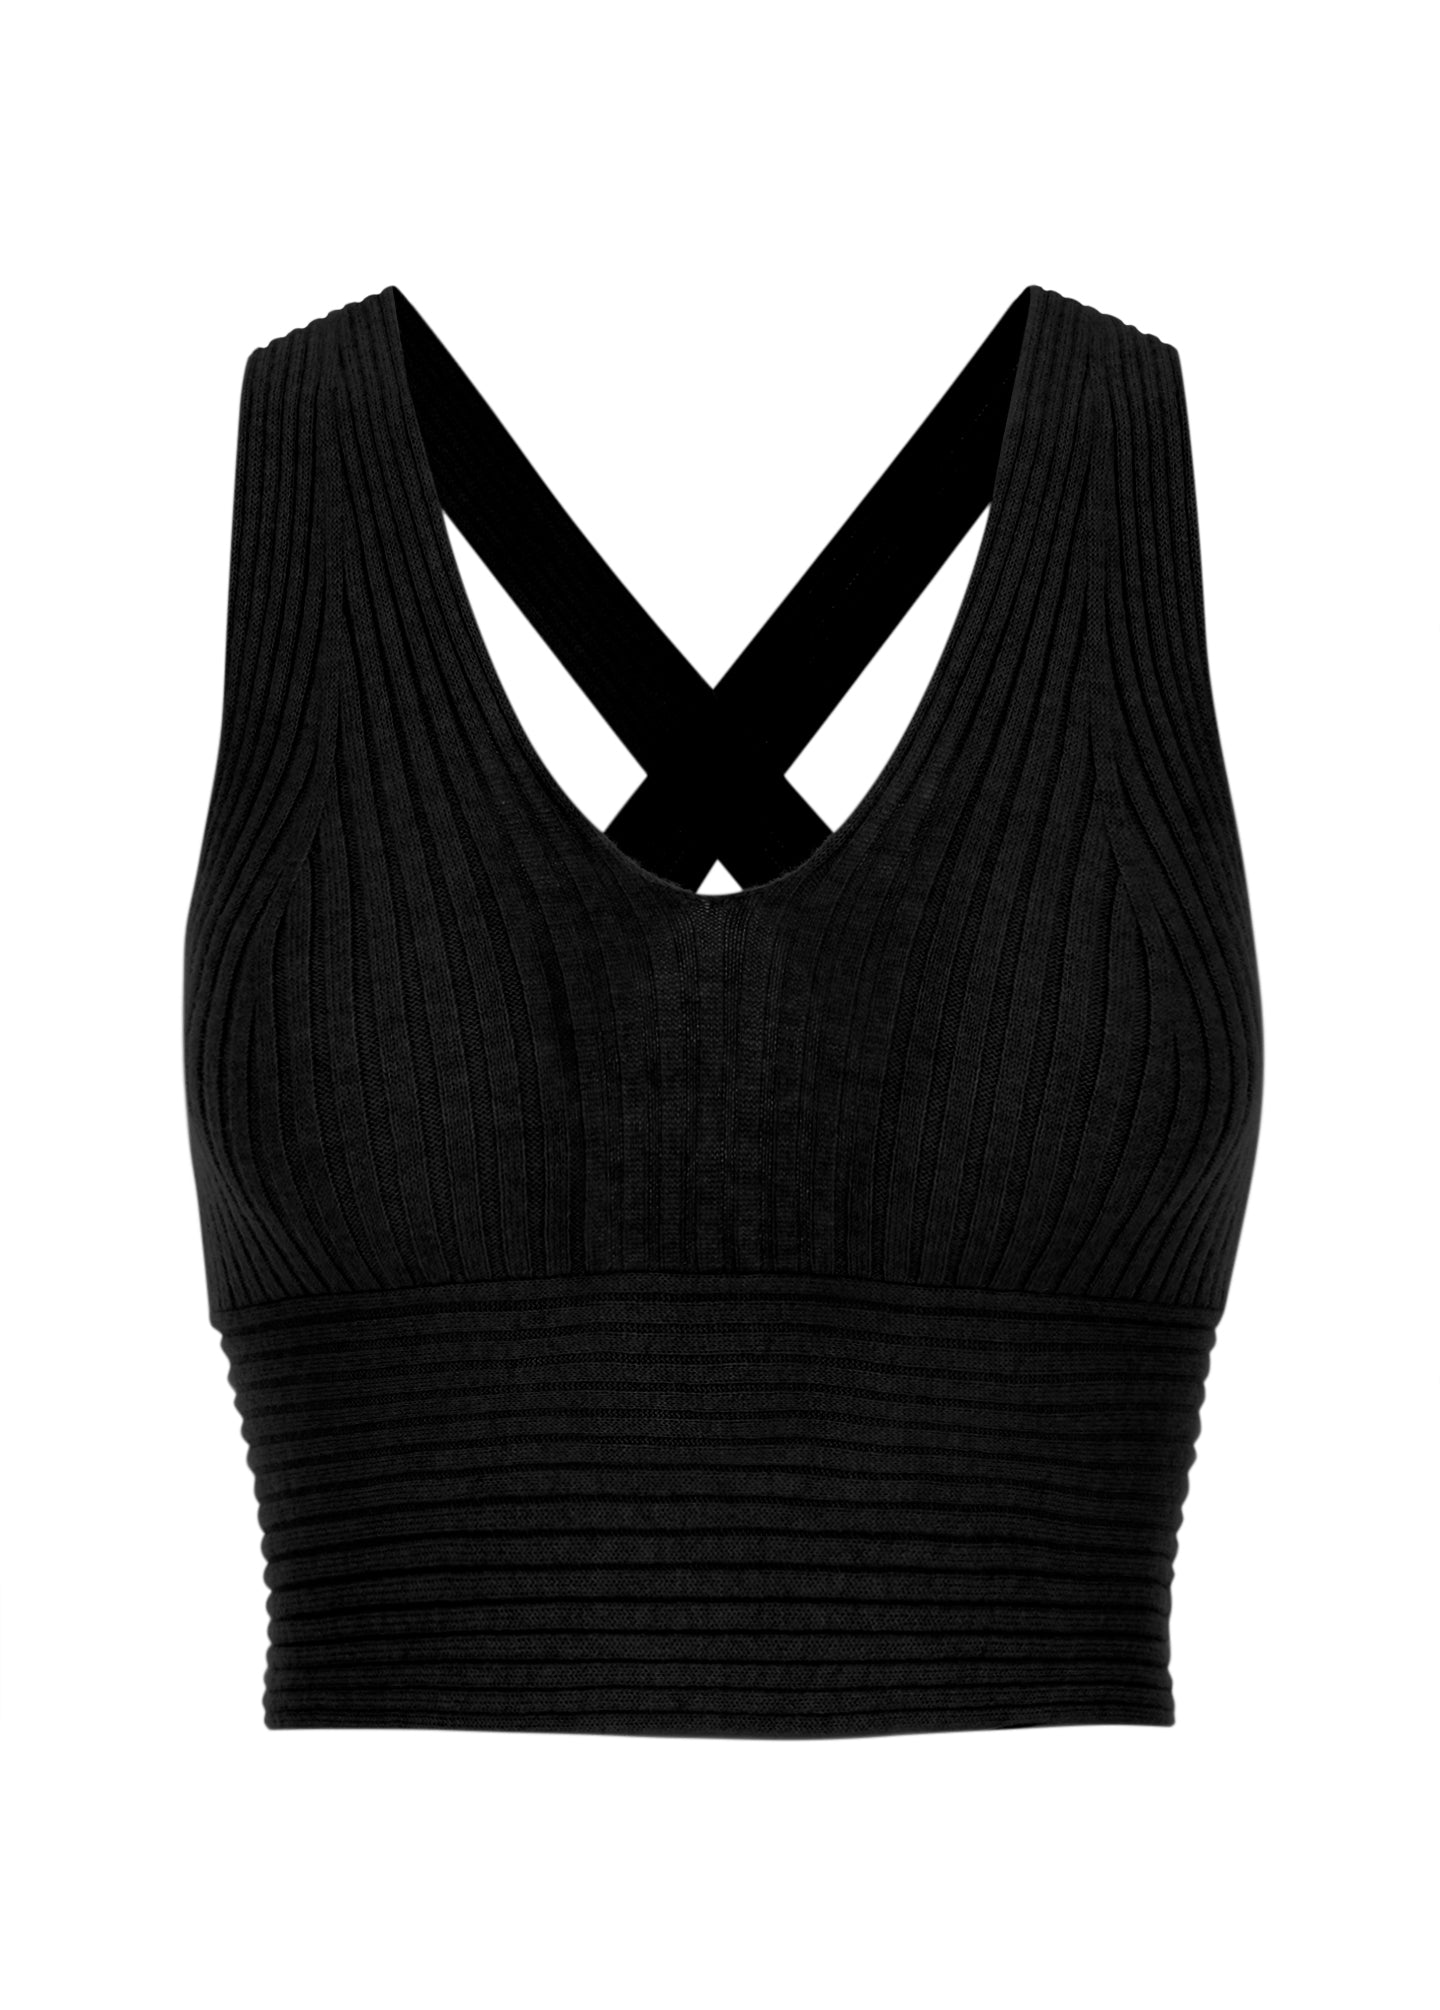 Cashmere cropped top bralette crossed back in black